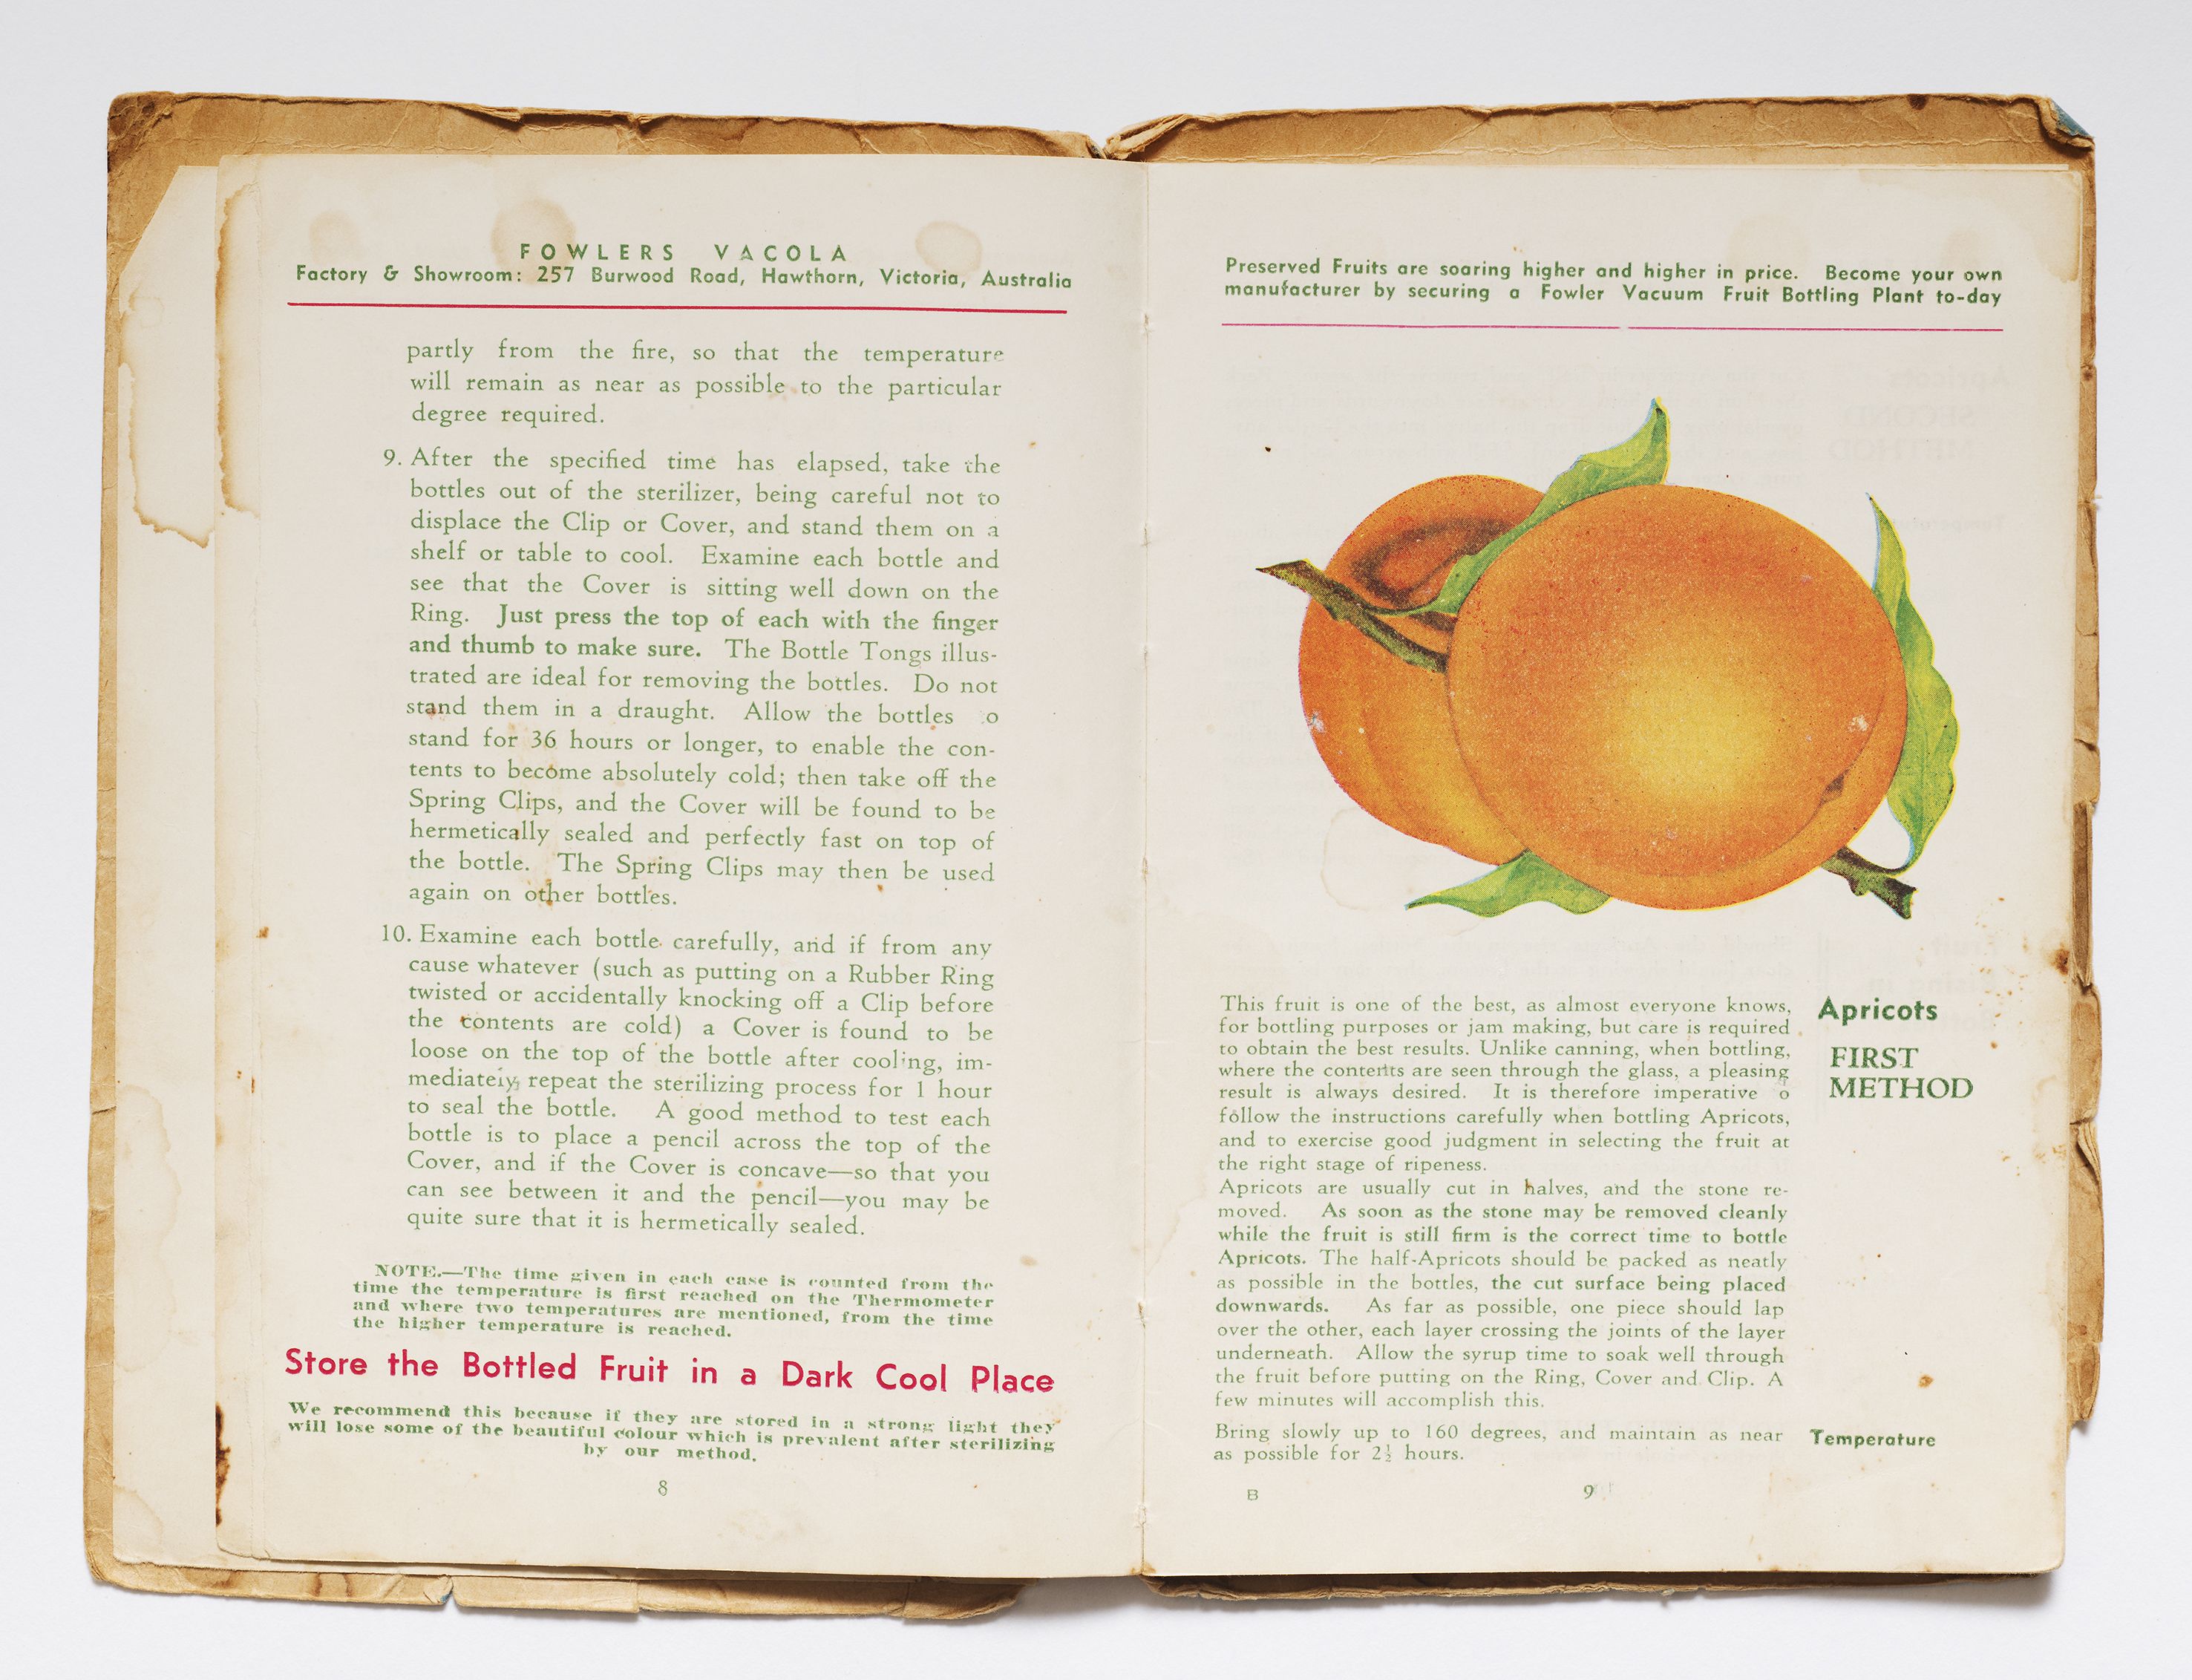 A page from Fowlers Vacola booklet with an illustration of an apricot and the sub heading Apricots, First Method. The method of bottling is described.